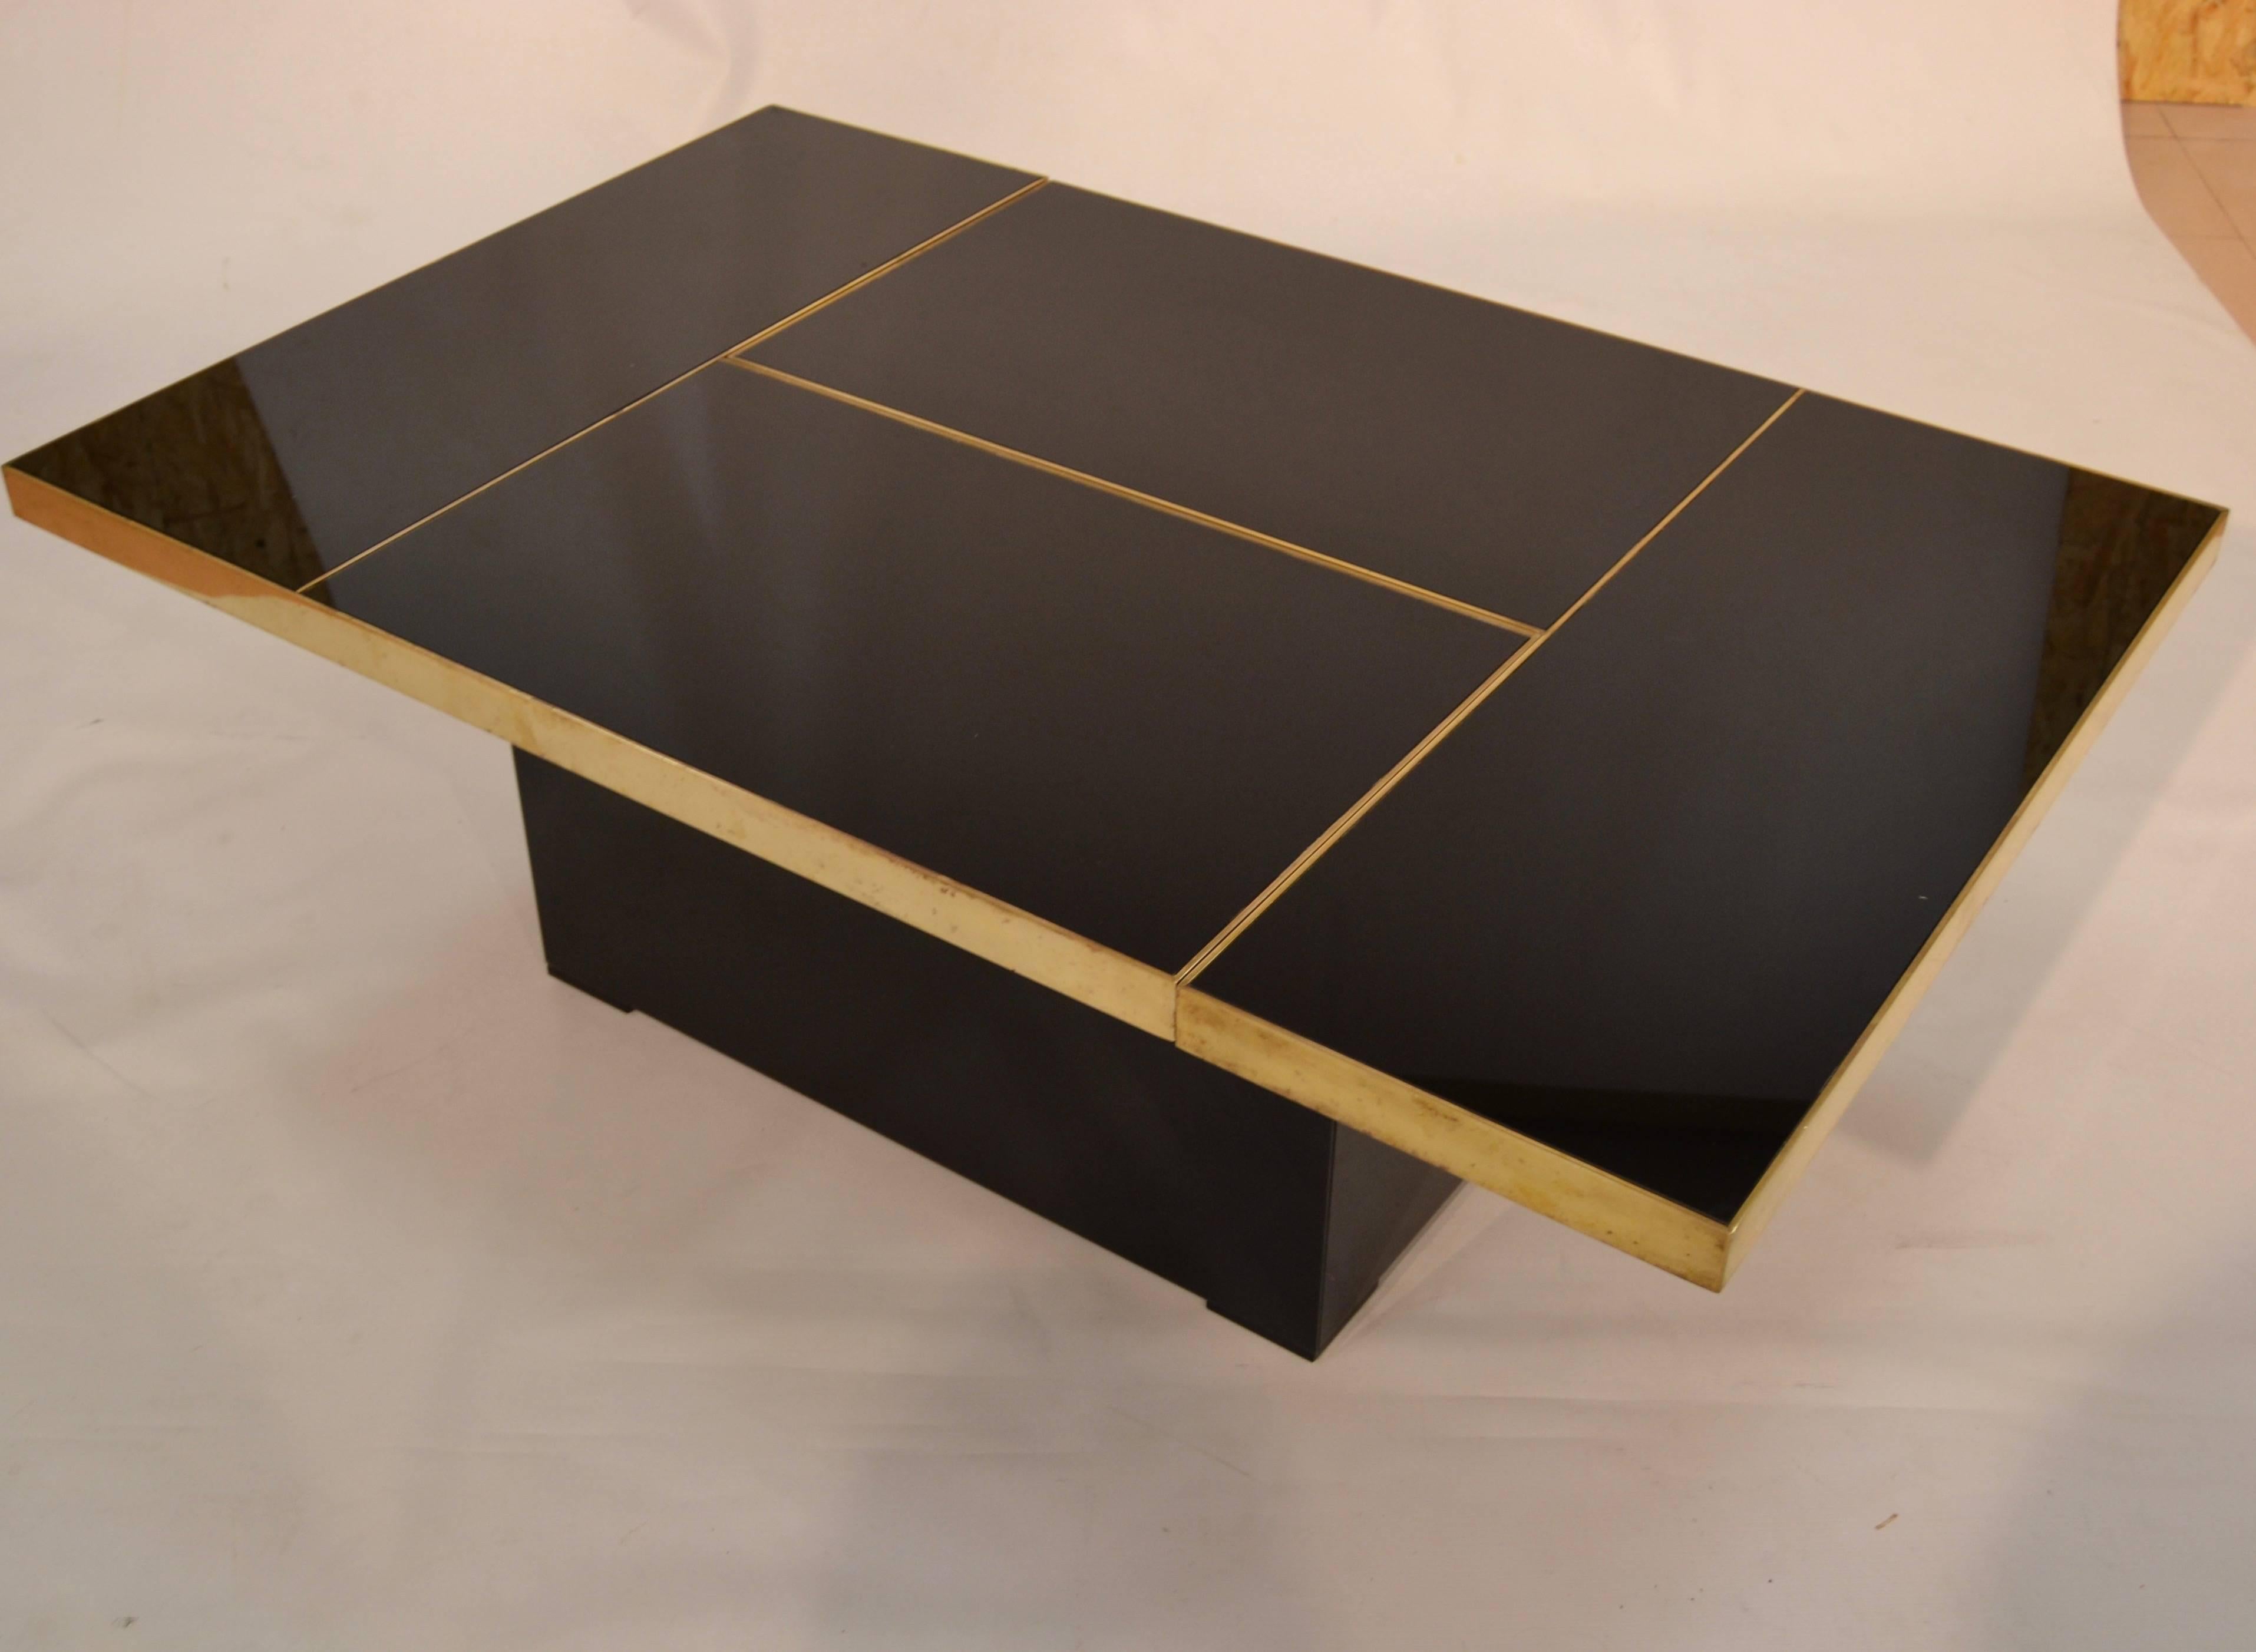 1970s sliding top table with black opaline glass and brass details by Maison Jansen
Base and feeds are also in black opaline glass
Interior mirrored bar with two Lucite shelfs
Perfect condition.